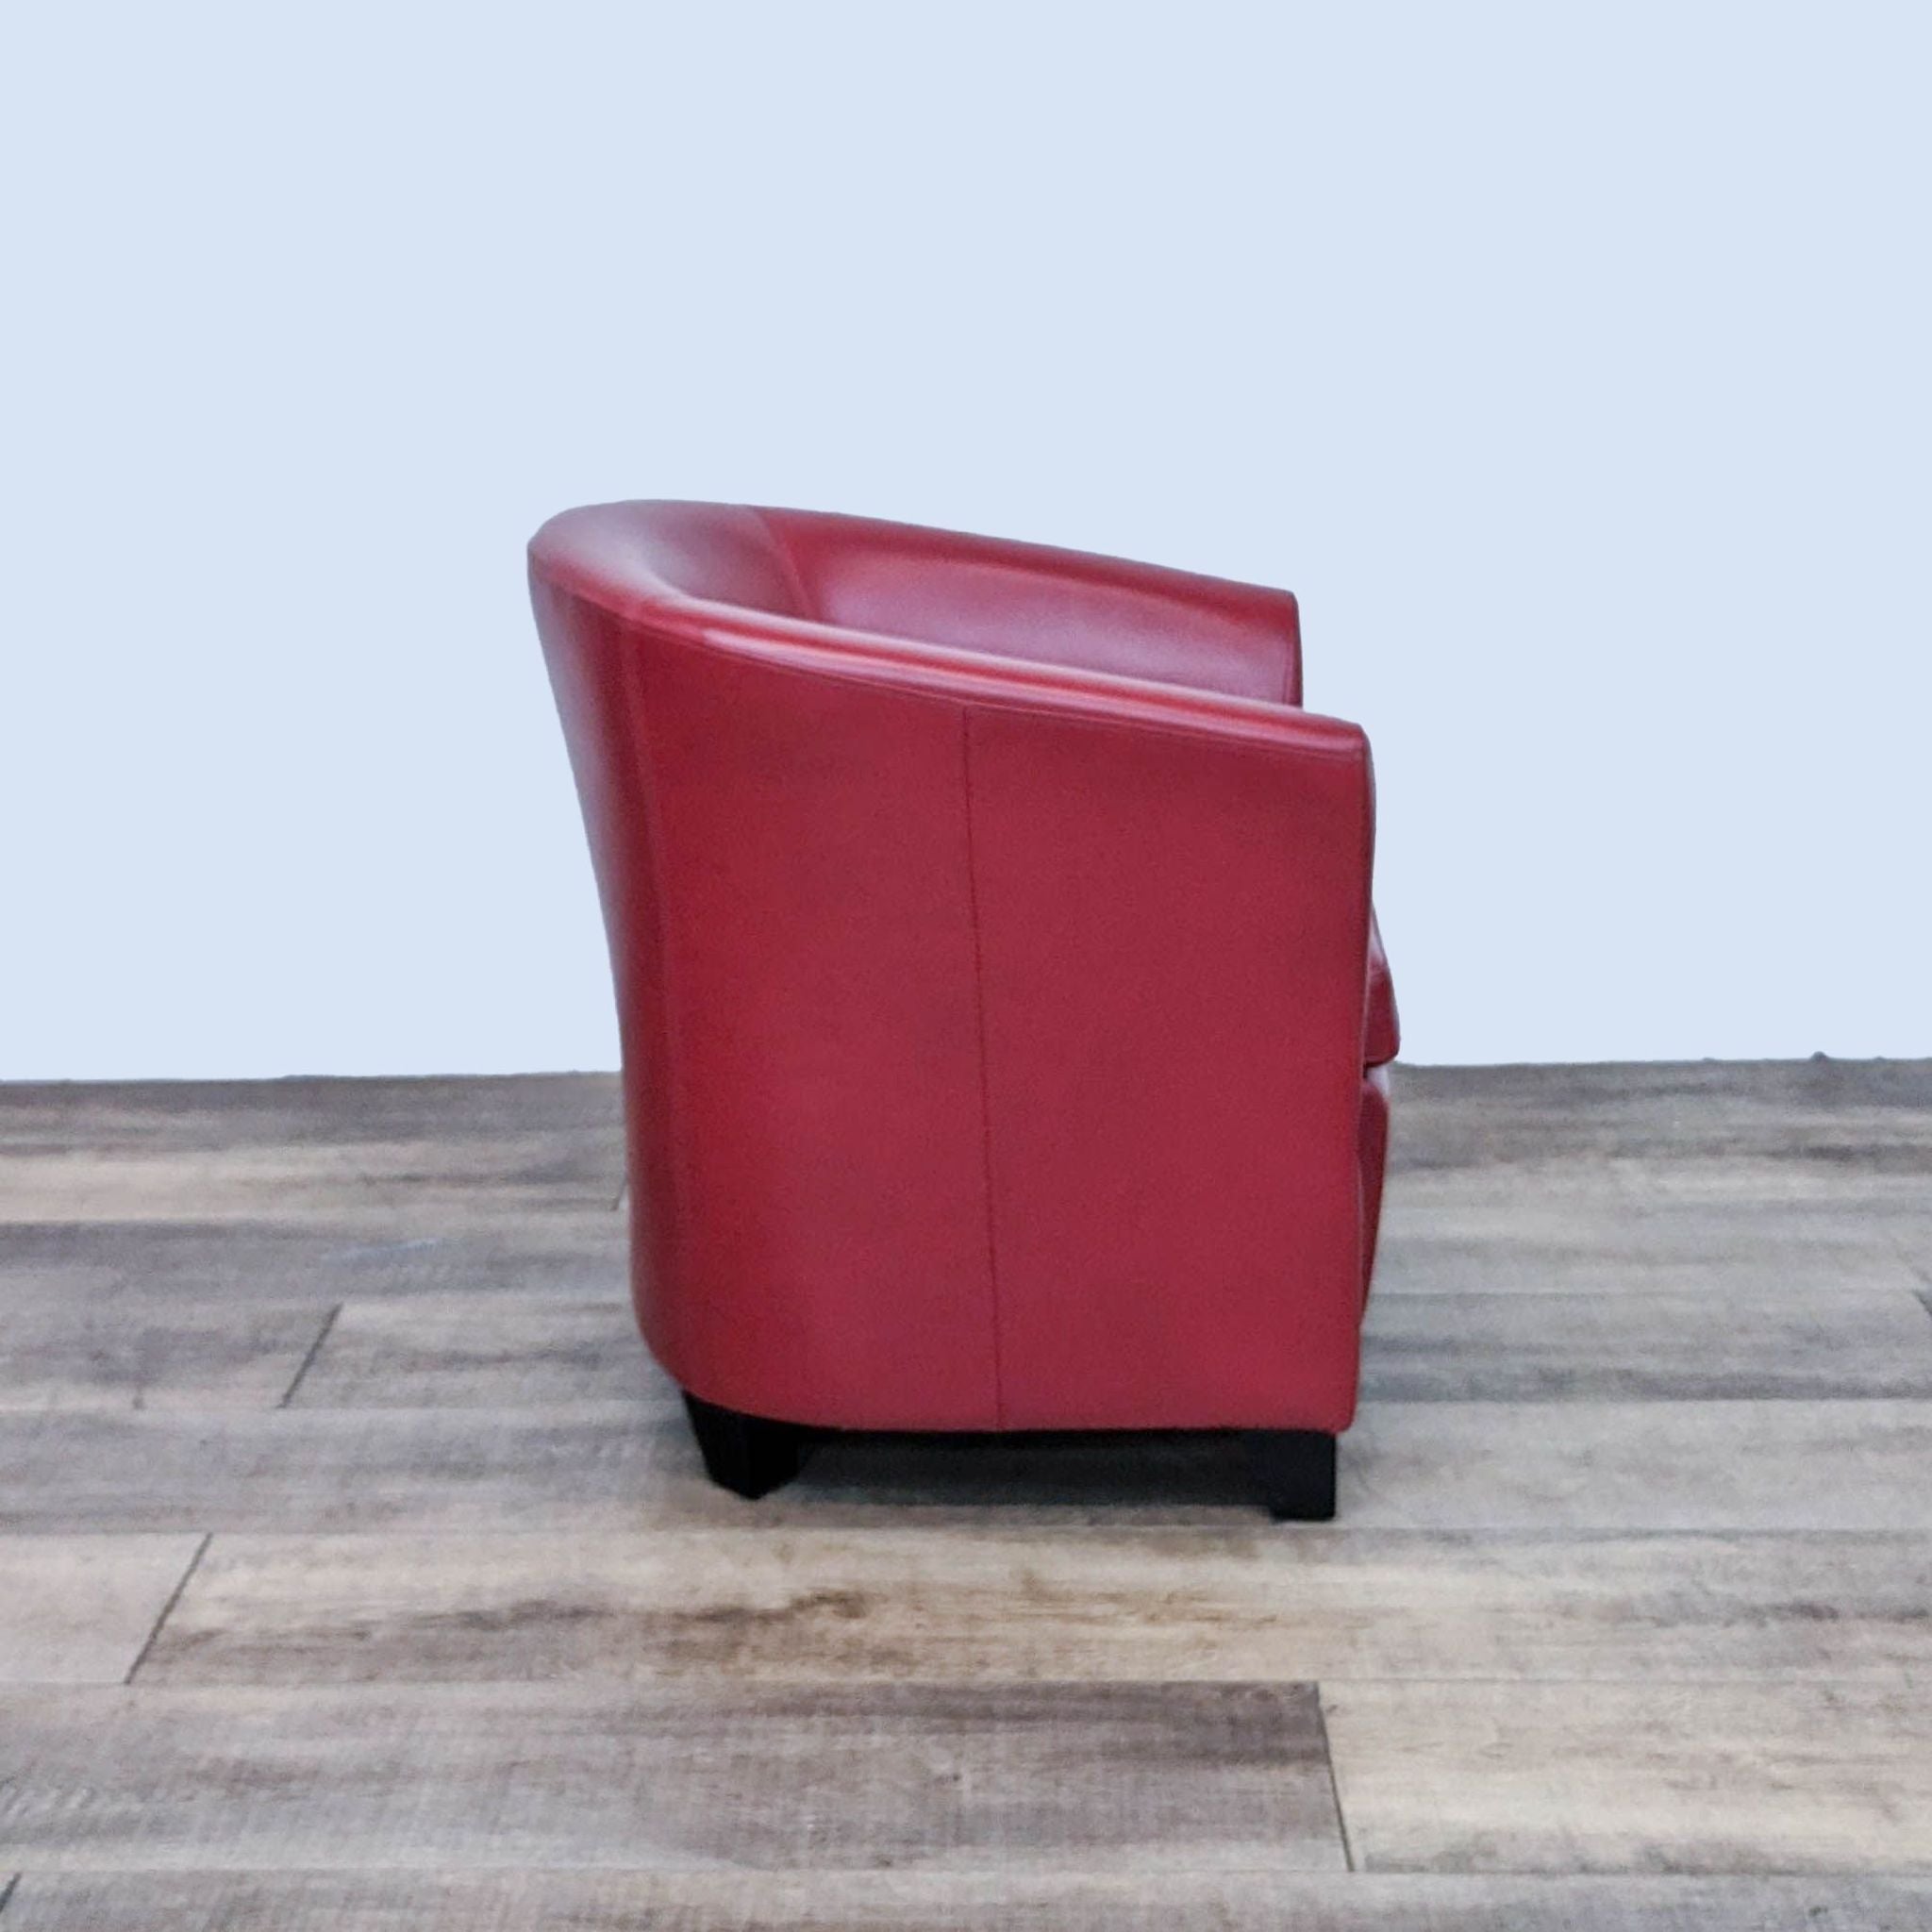 Art Deco red leather tub chair by Reperch, side angle, showcasing the chair's curved lines and wooden legs.